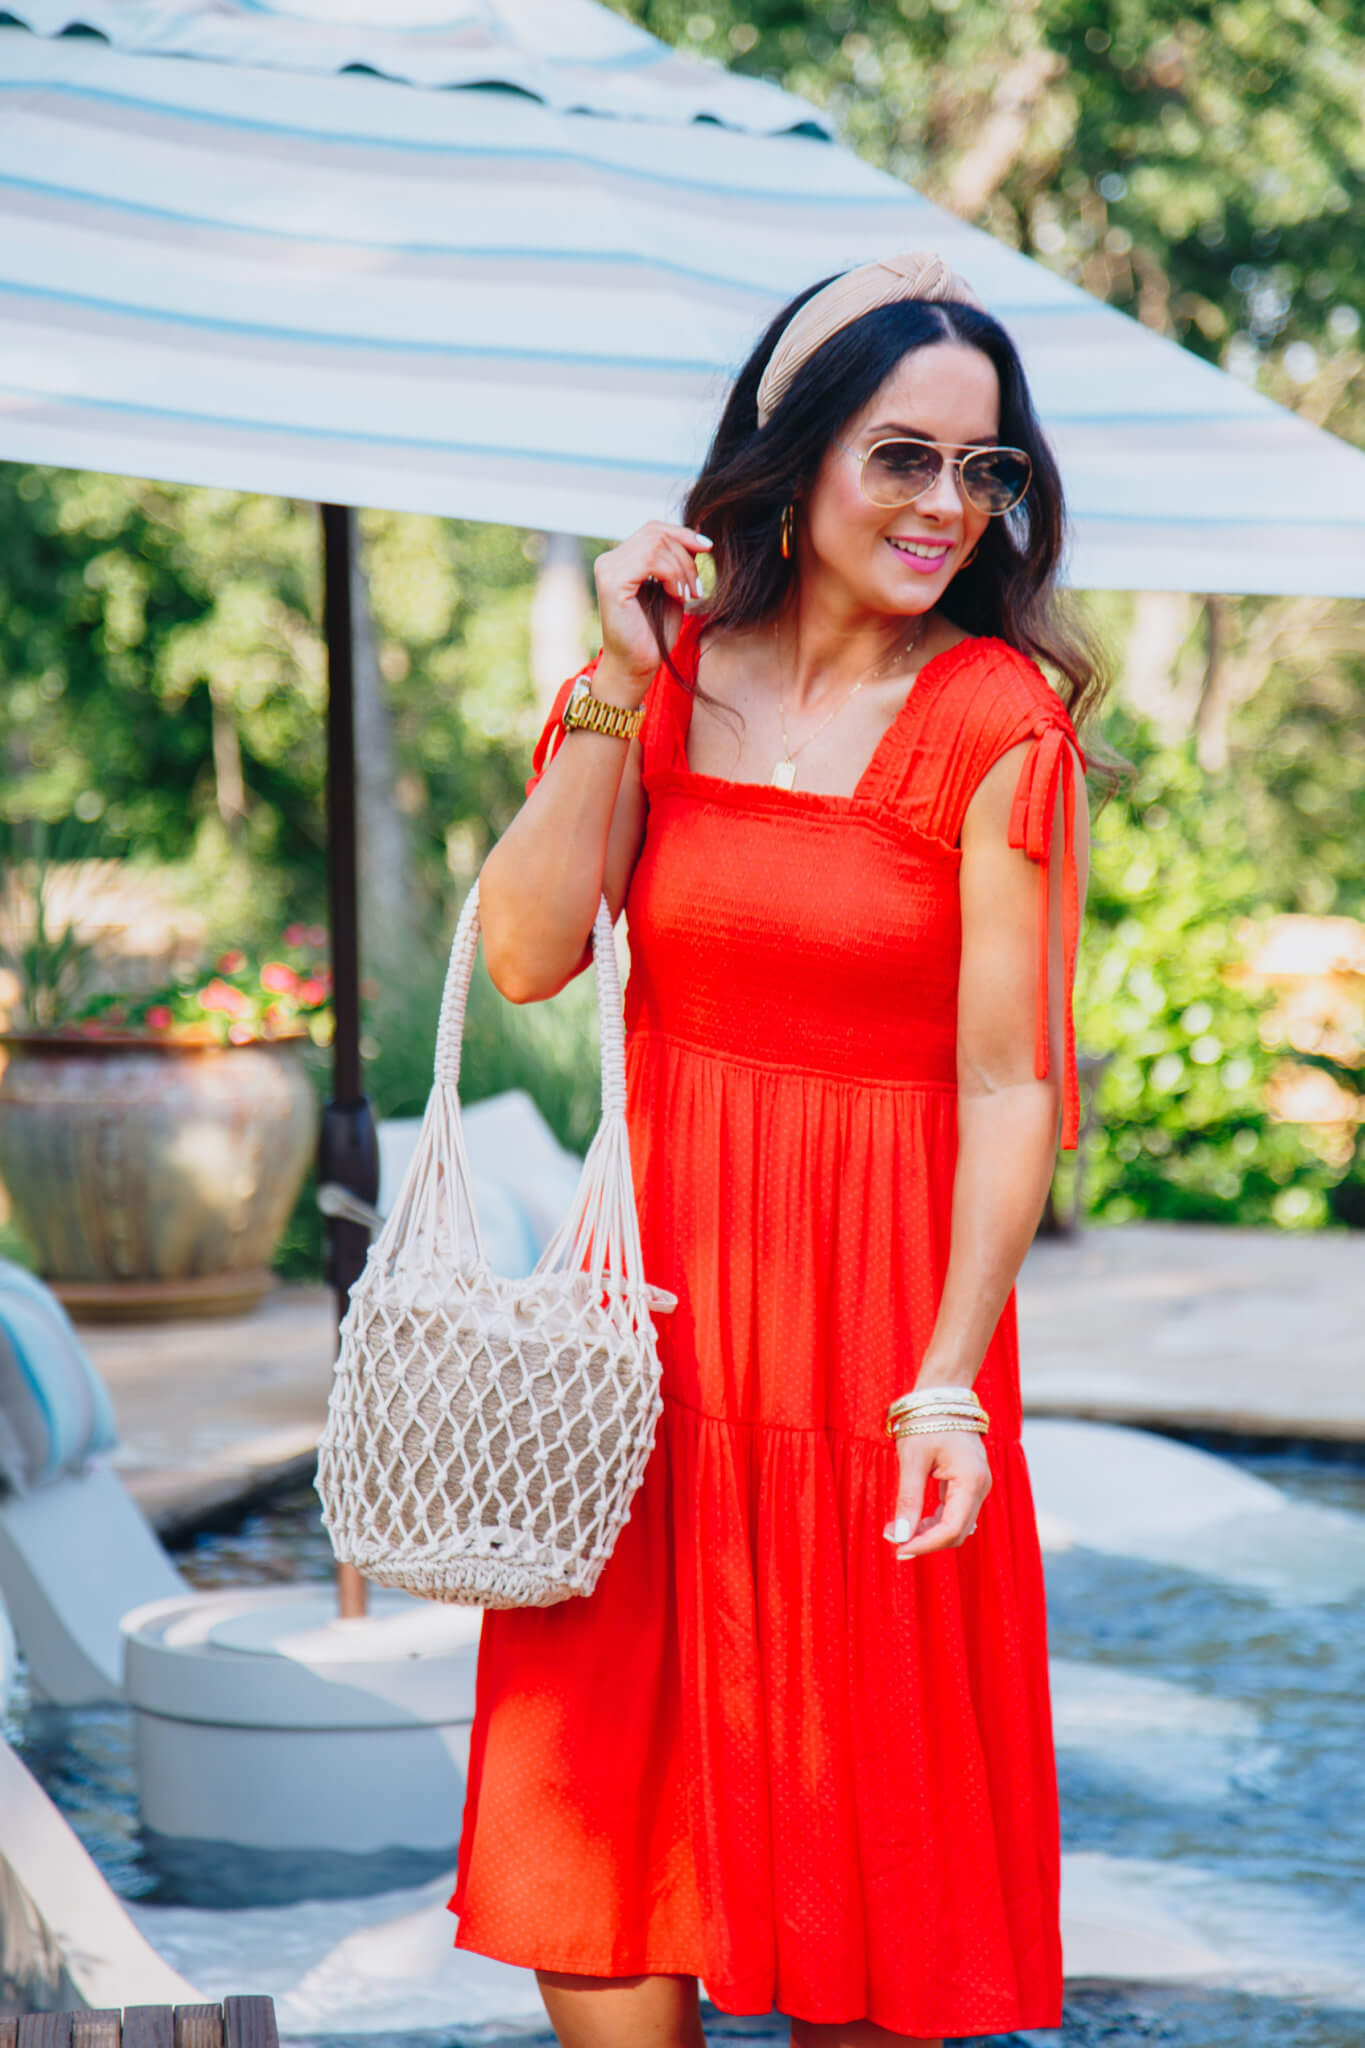 30 Perfect Summer Dresses Under $40 - The Double Take Girls